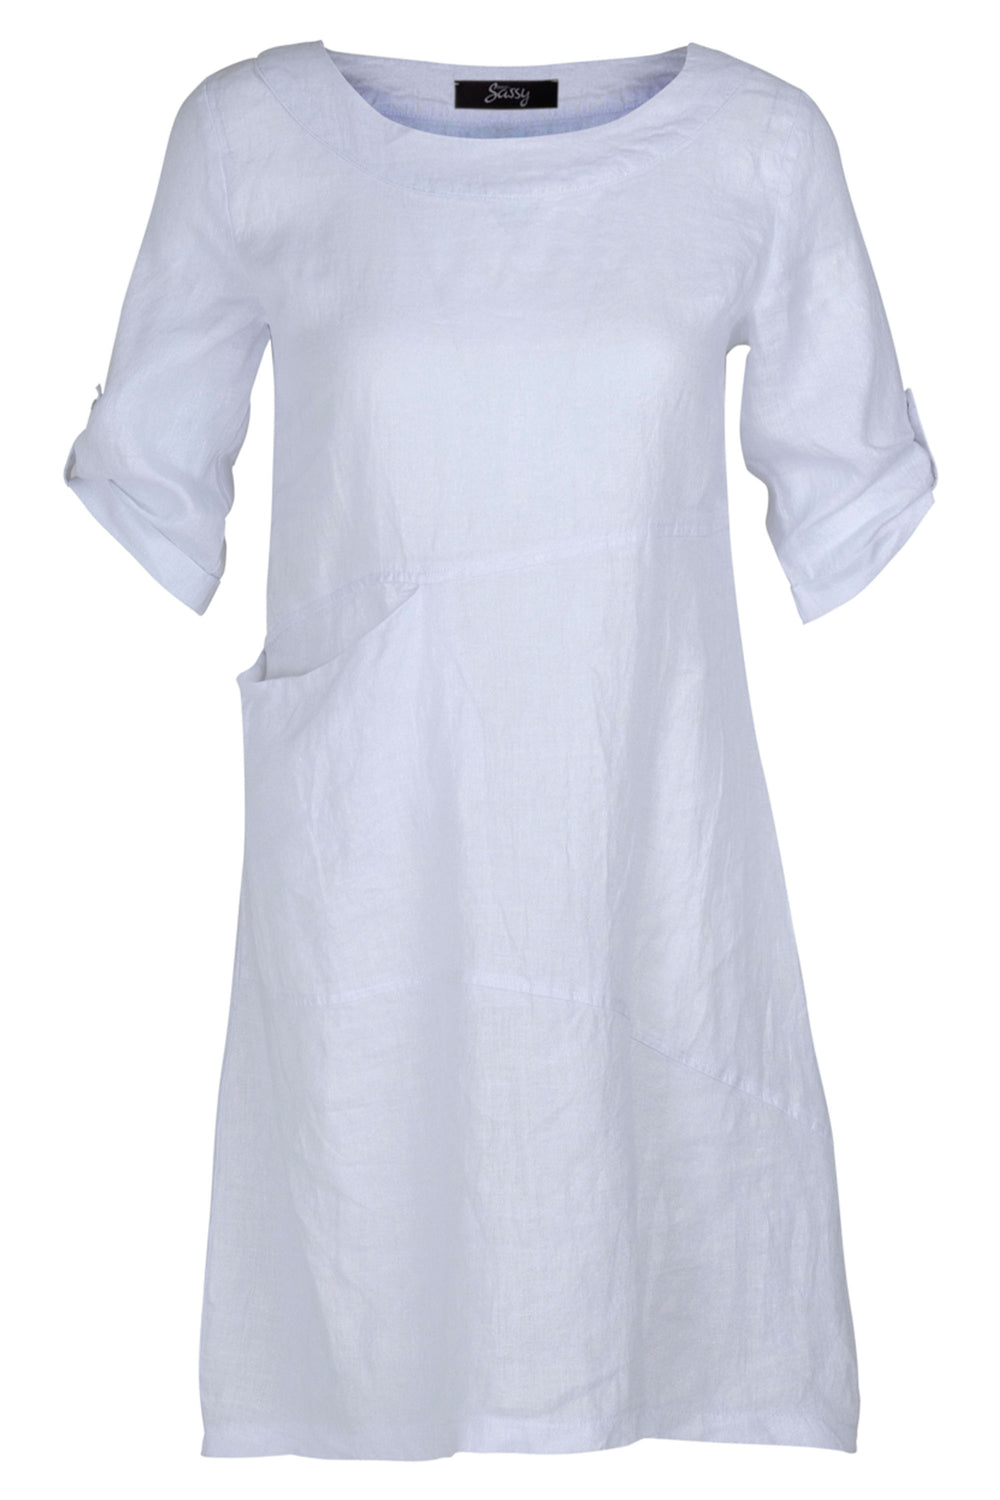 EverSassy Spring 2023 women's casual linen shift t-shirt dress with pocket - white front